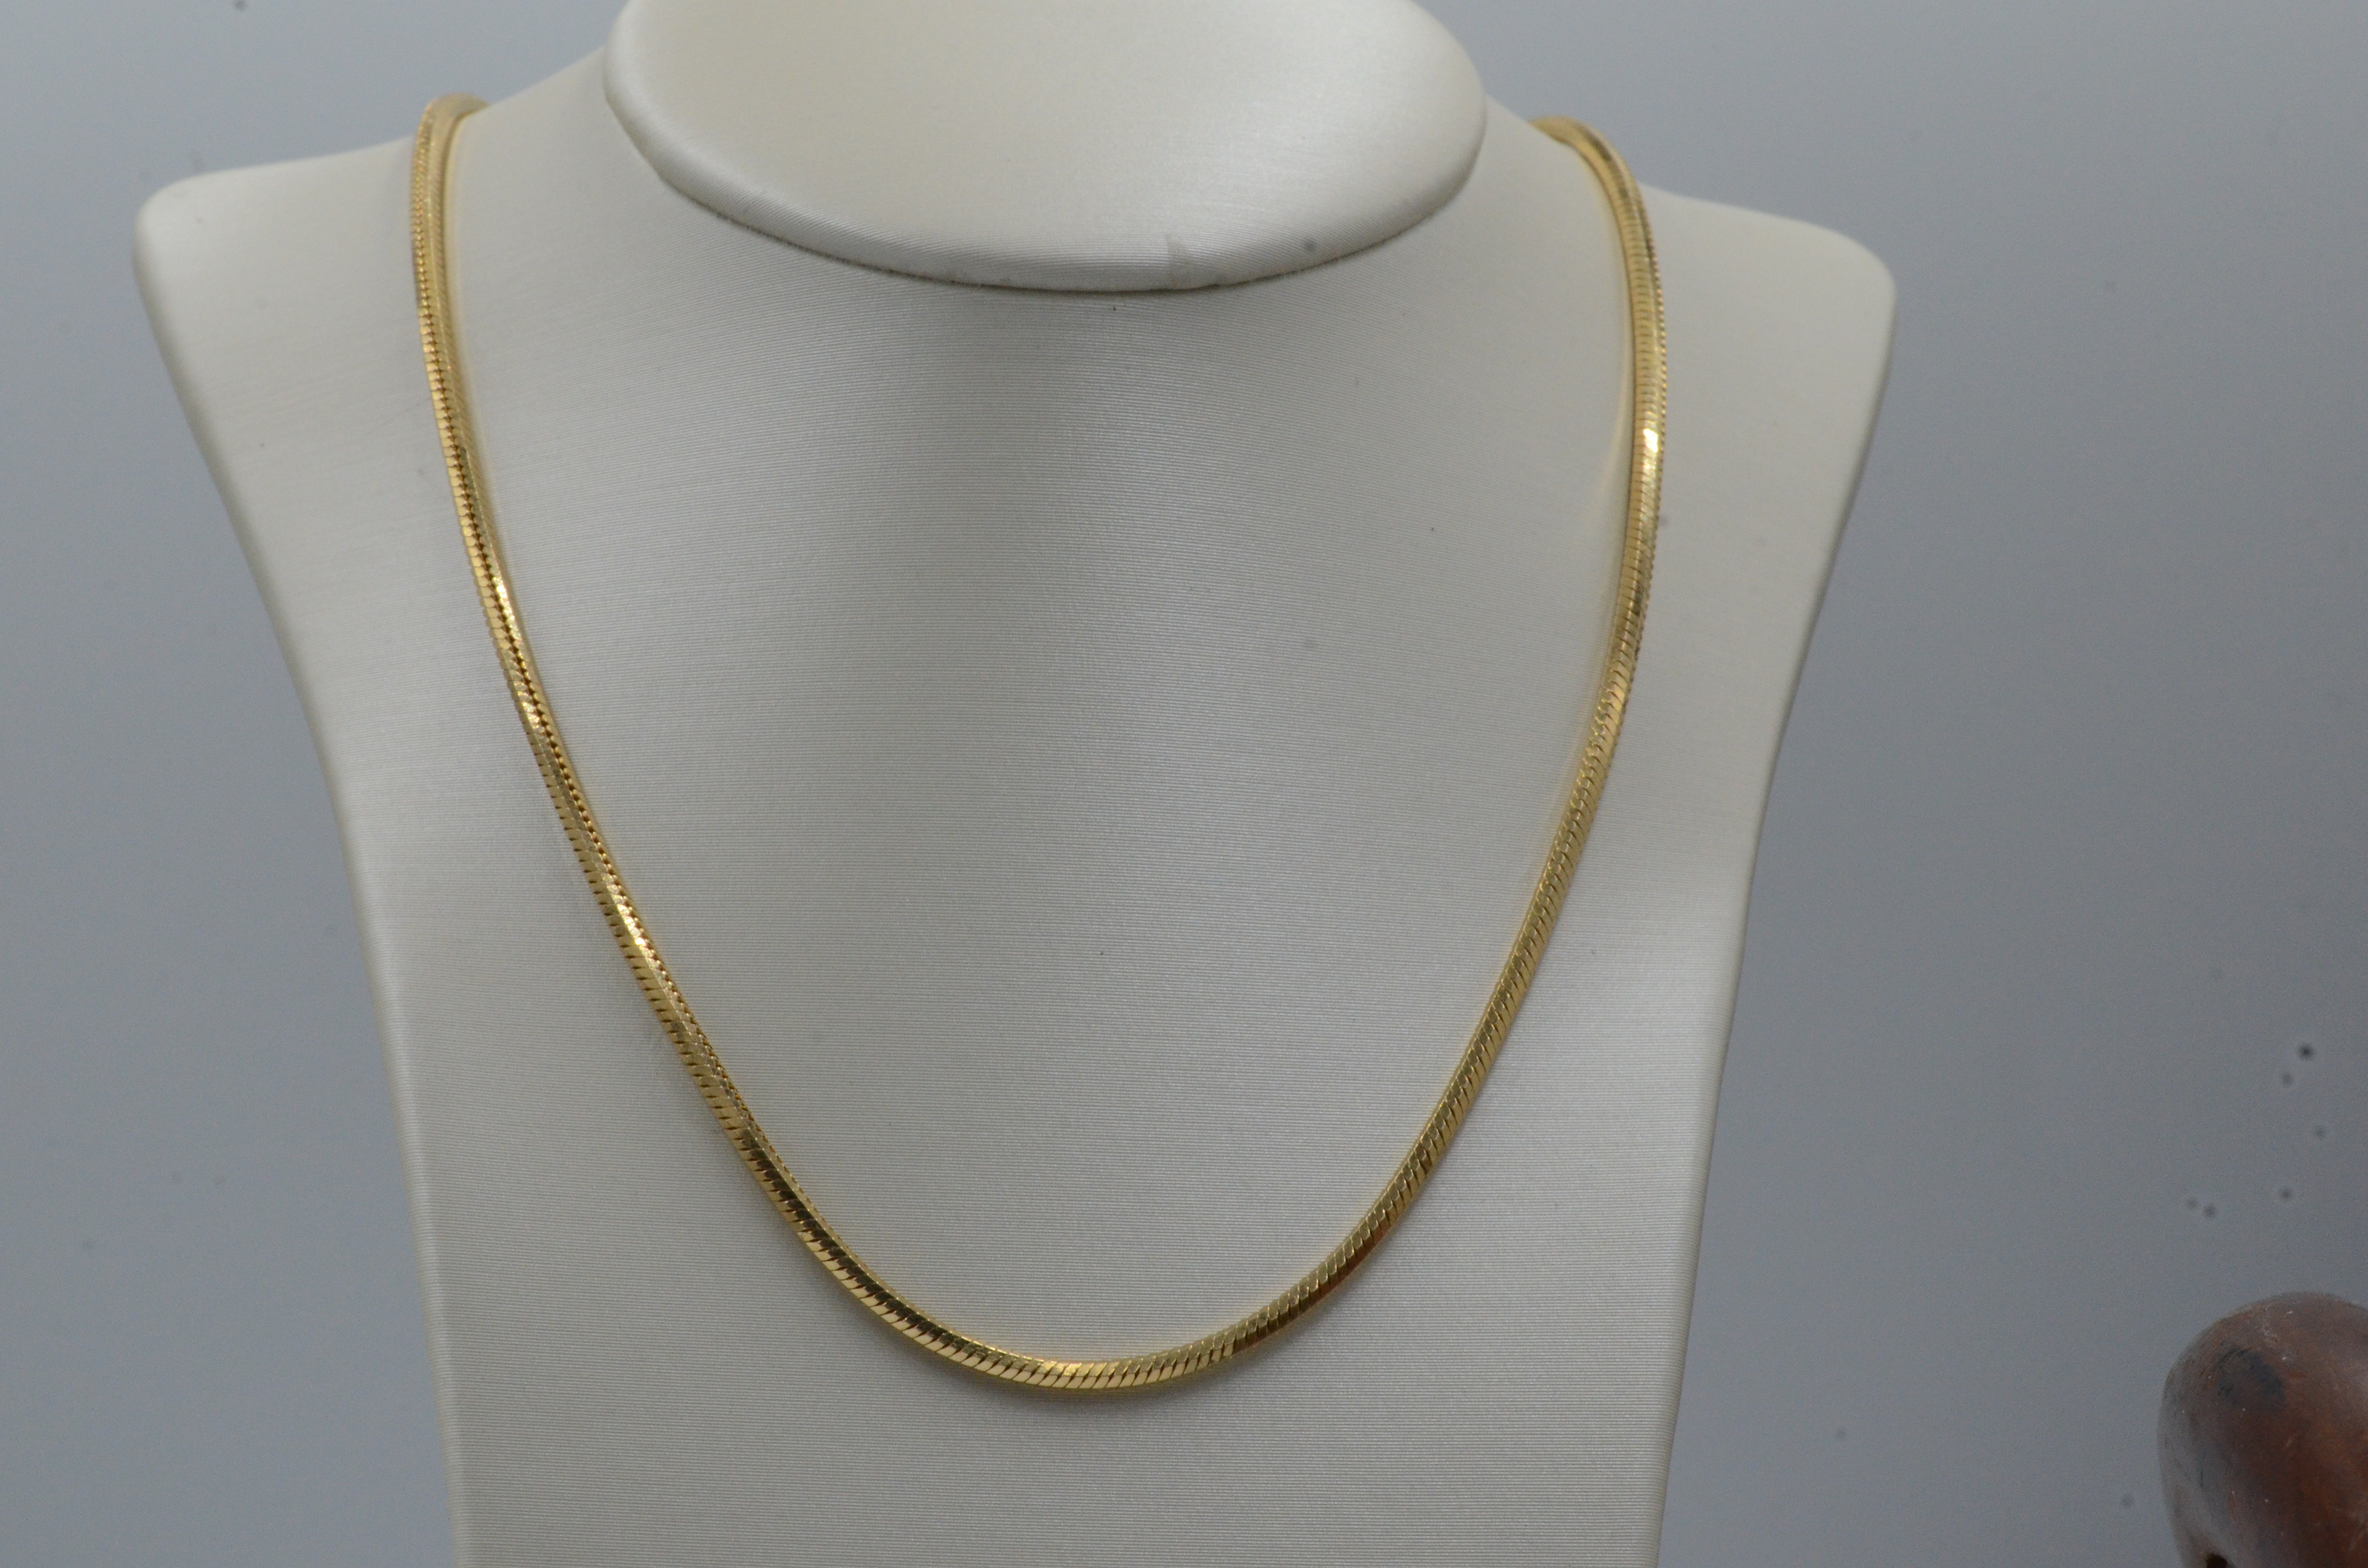 16"  1.75 mm Octagon snake chain. 9.05 grams. This chain would work well with the Abstract Trillion/Diamond Pendant